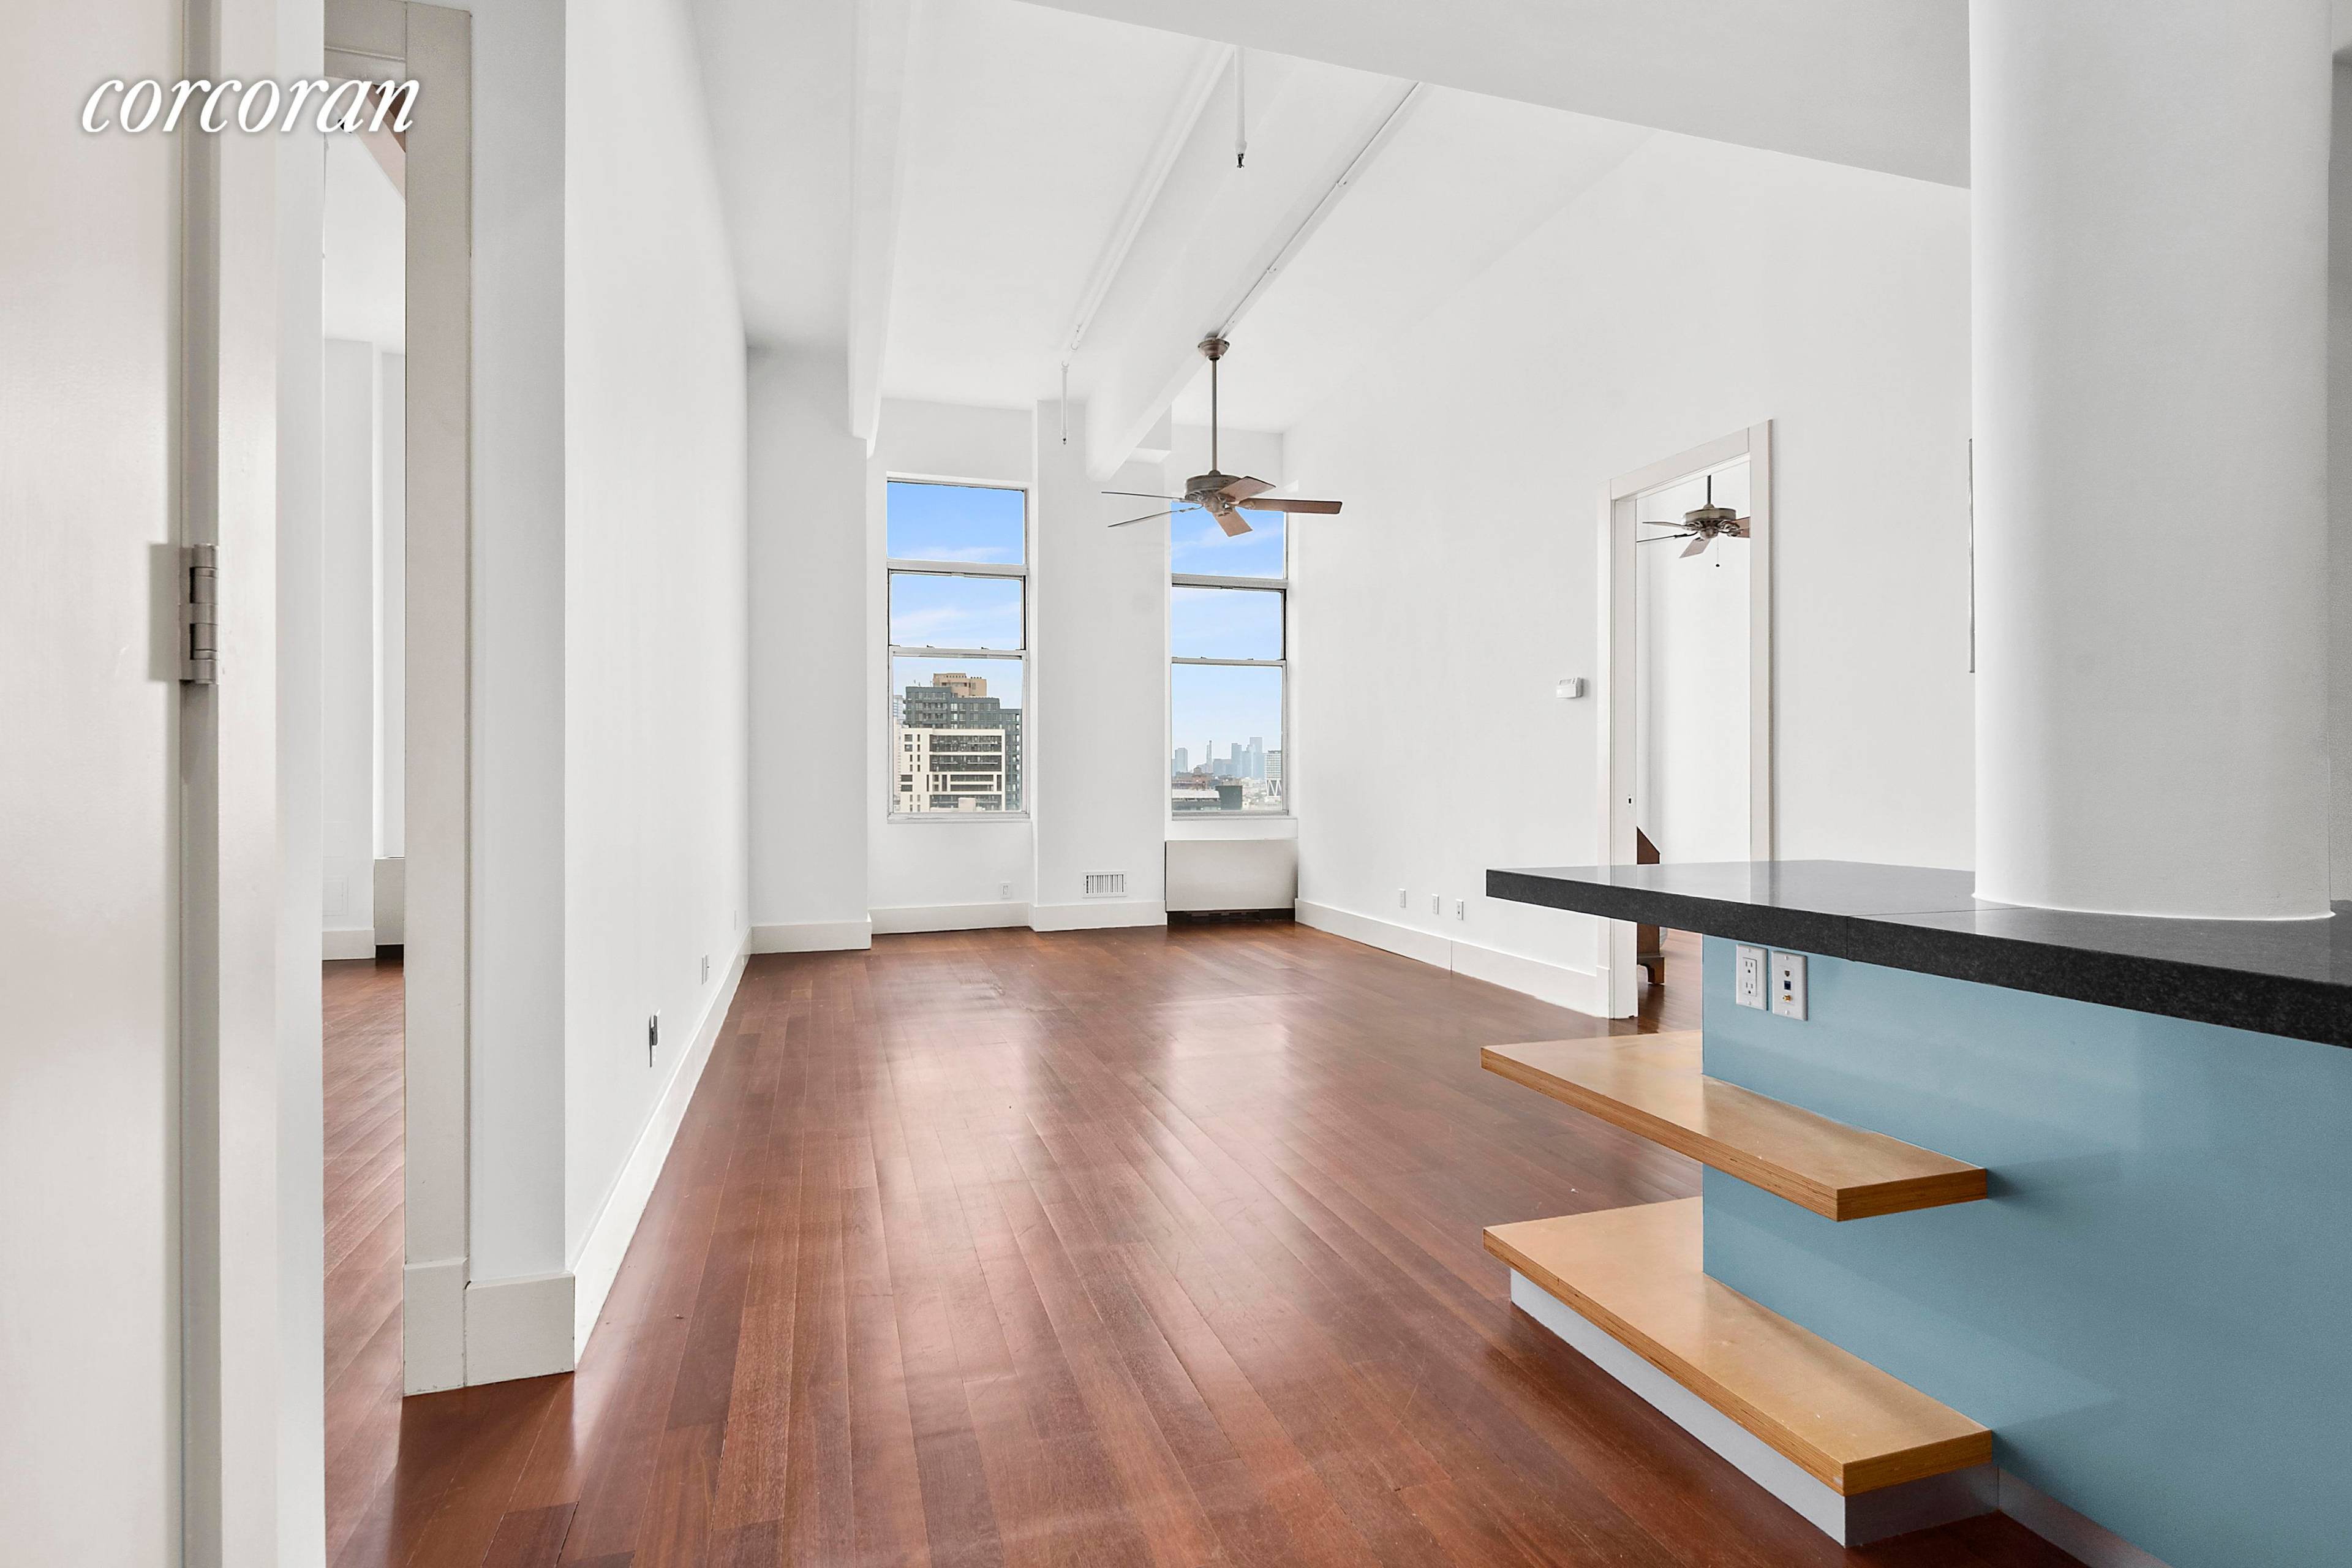 Direct City VIEWS in this Massive Split Two Bedroom Loft on the 10th floor located in the renowned Karl Fischer designed Gretsch condominium building in Williamsburg.